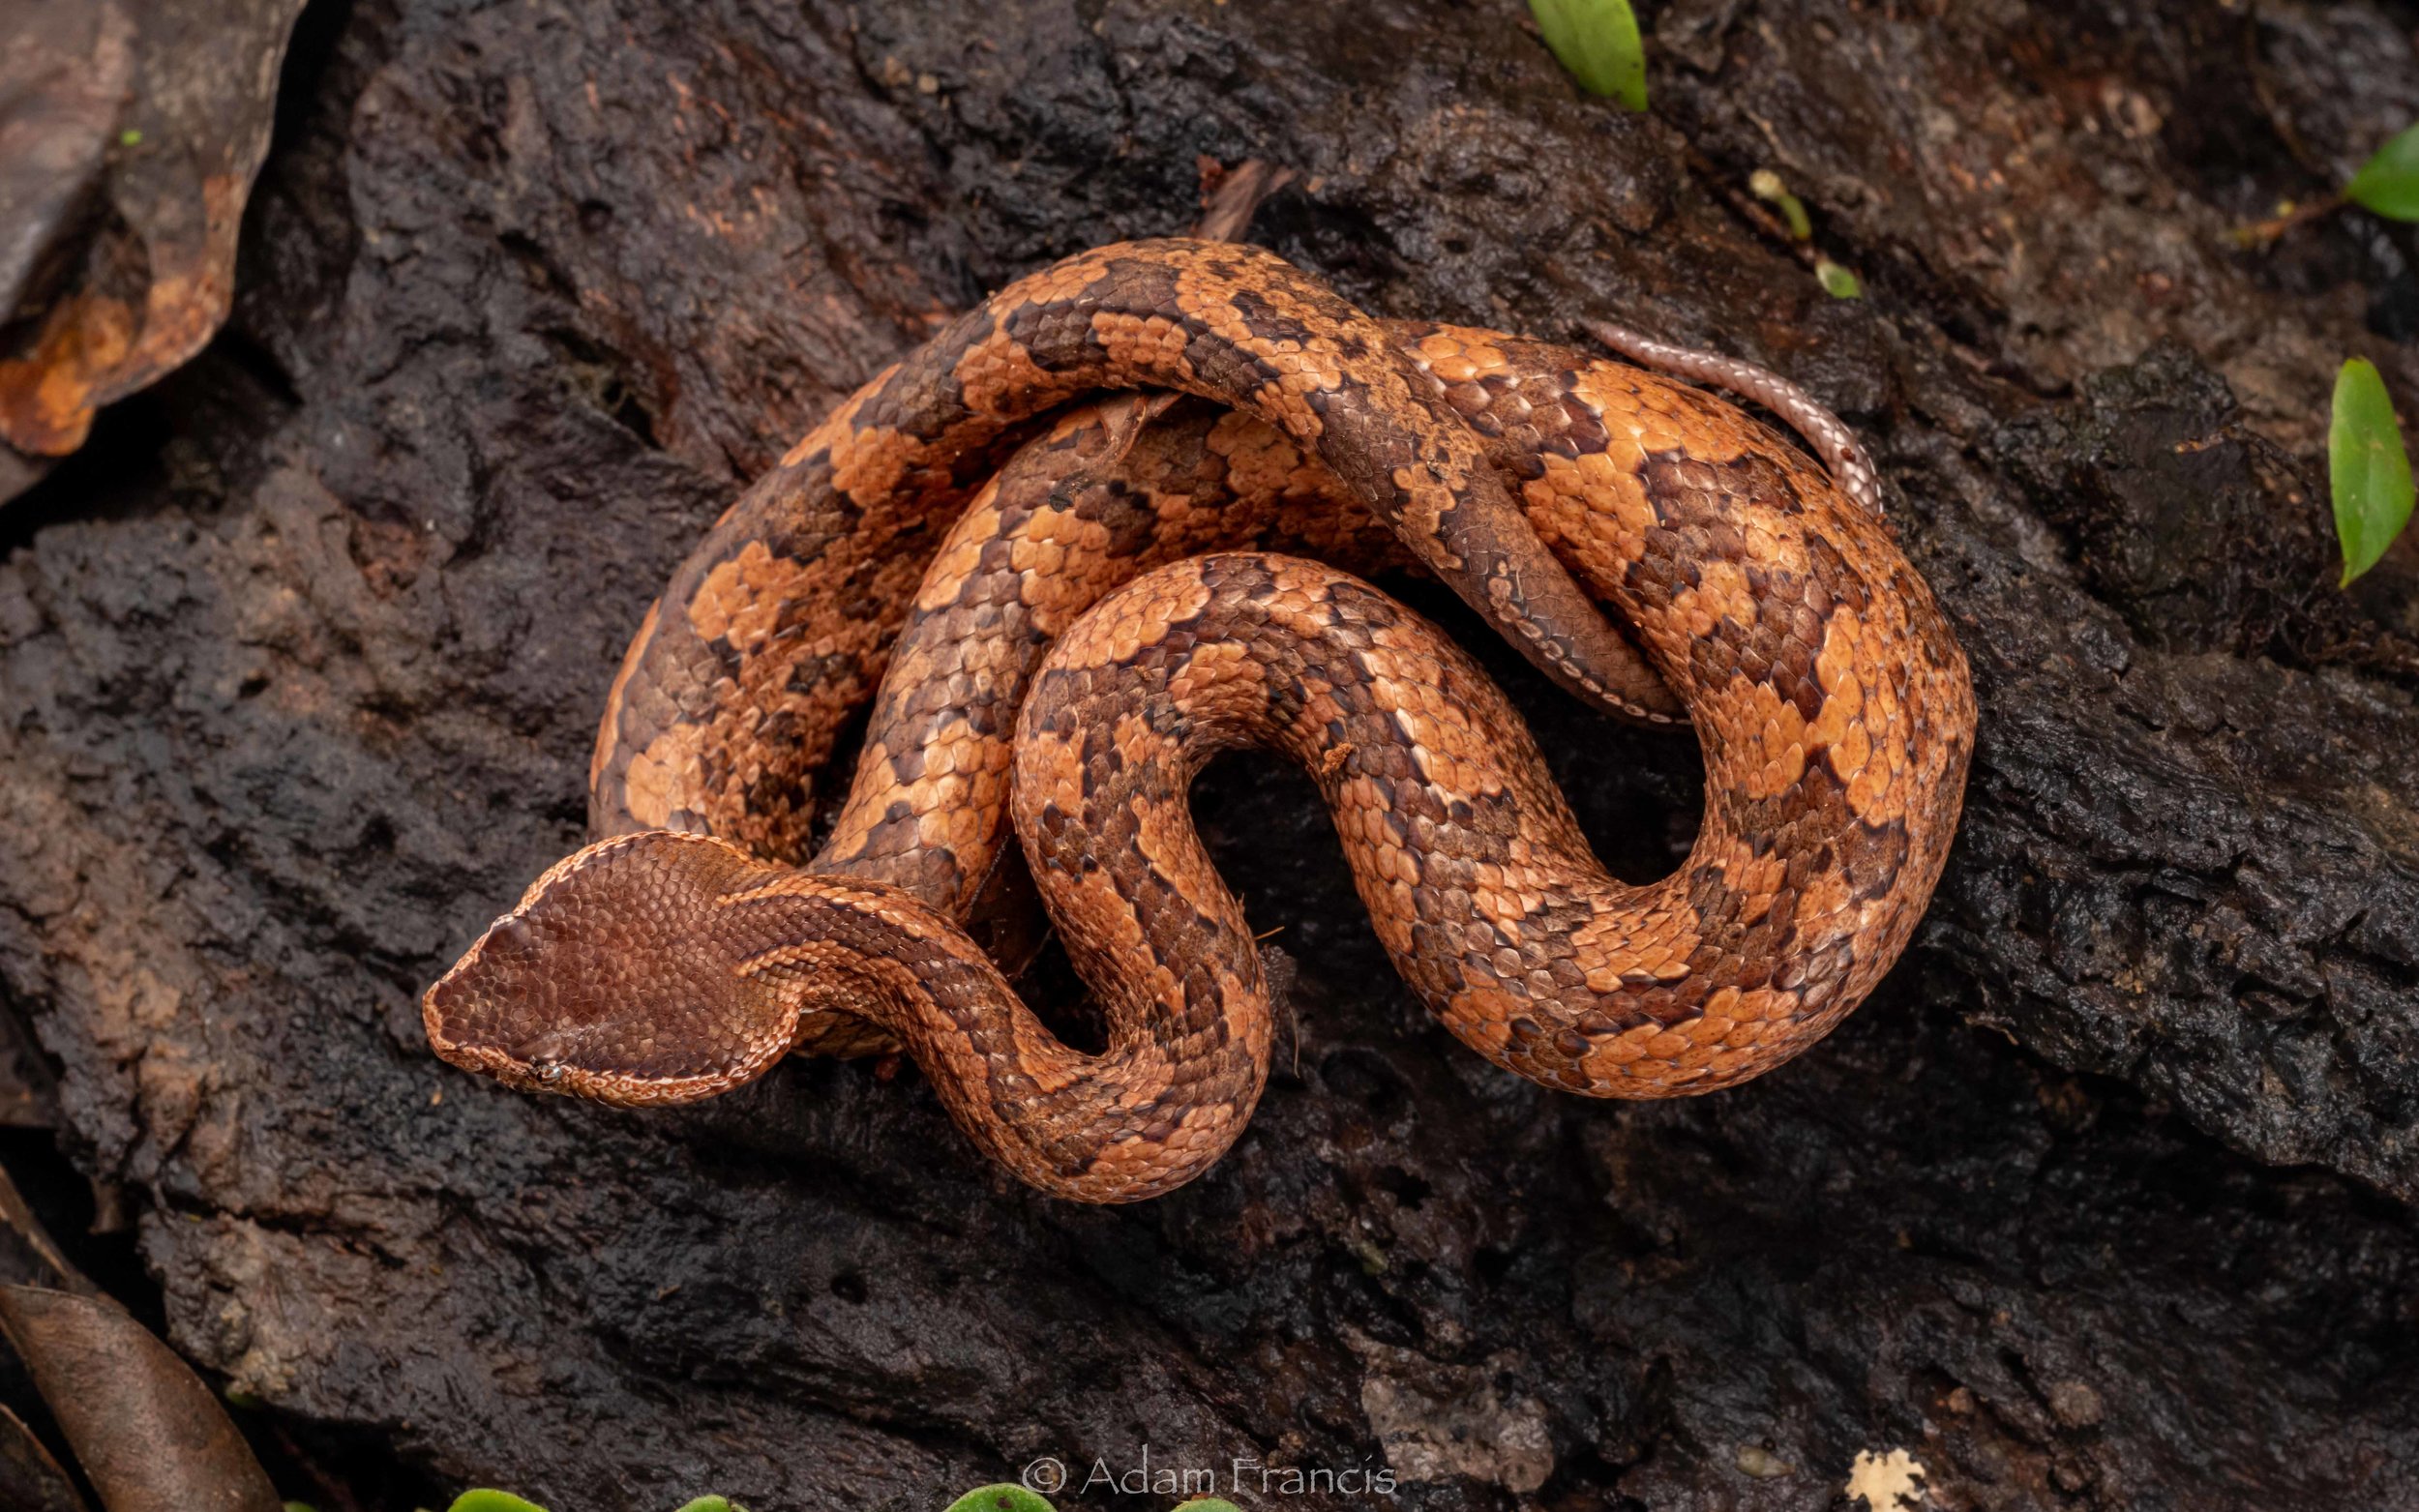 Mountain Pit Viper - Ovophis tonkinensis